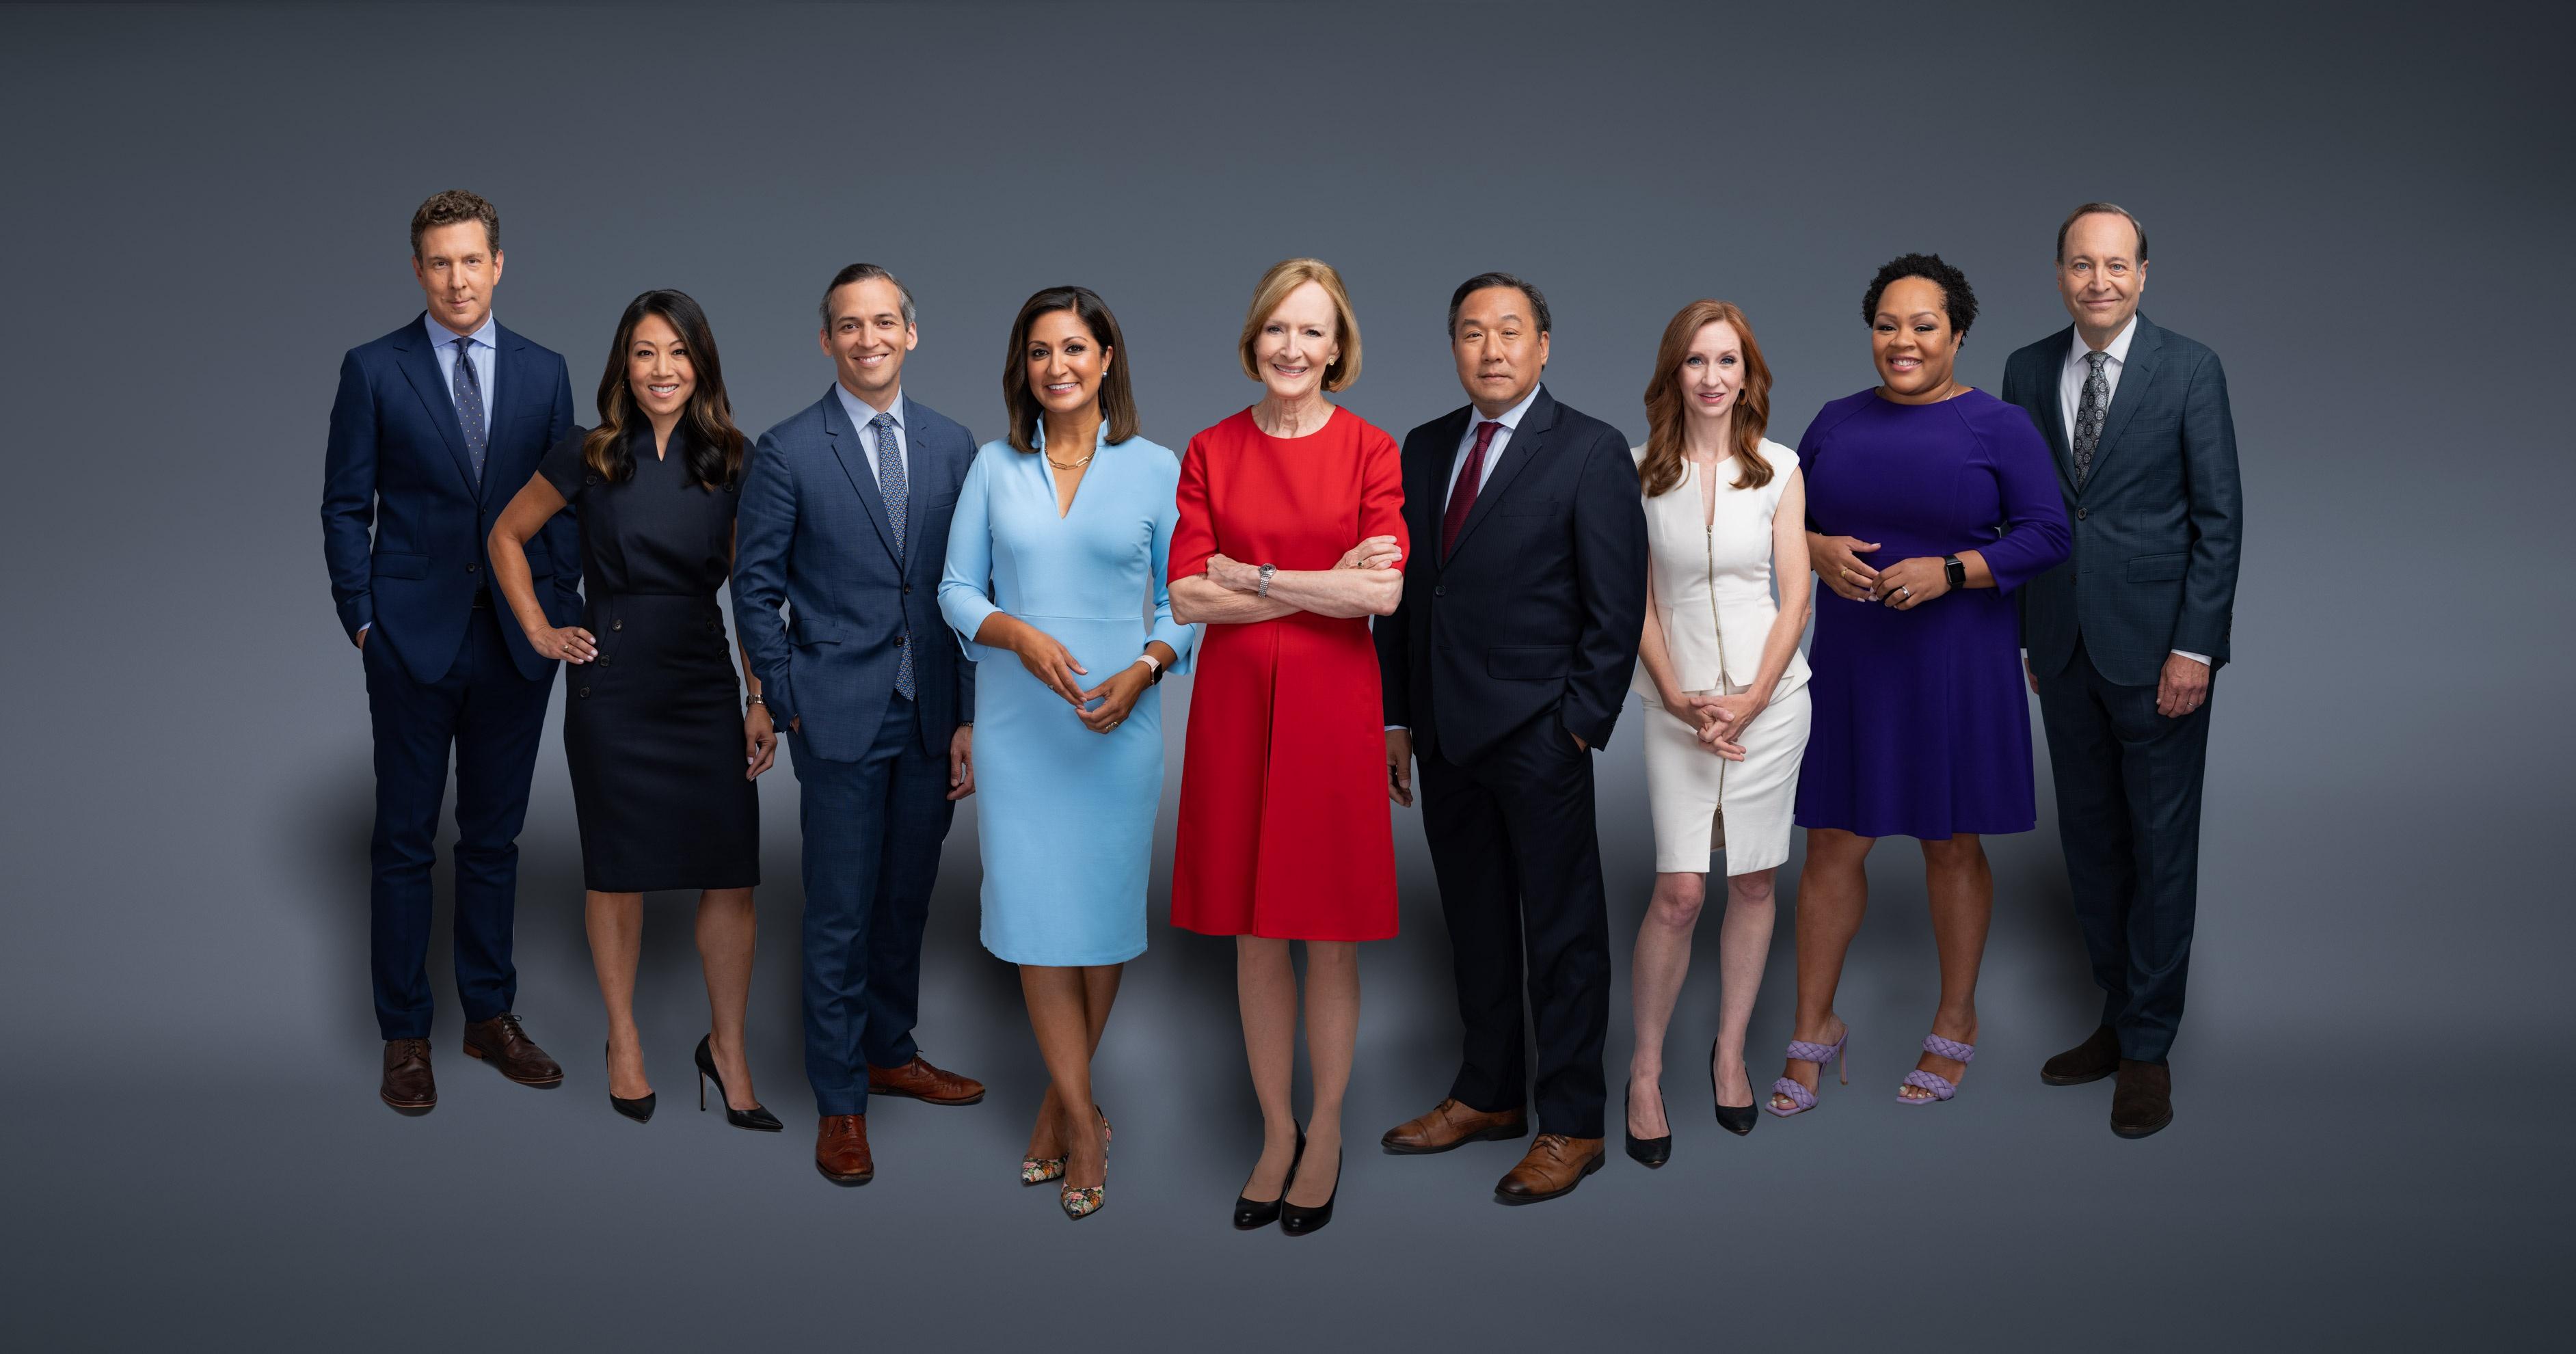 photo of the lineup of PBS NewsHour anchors and correspondents